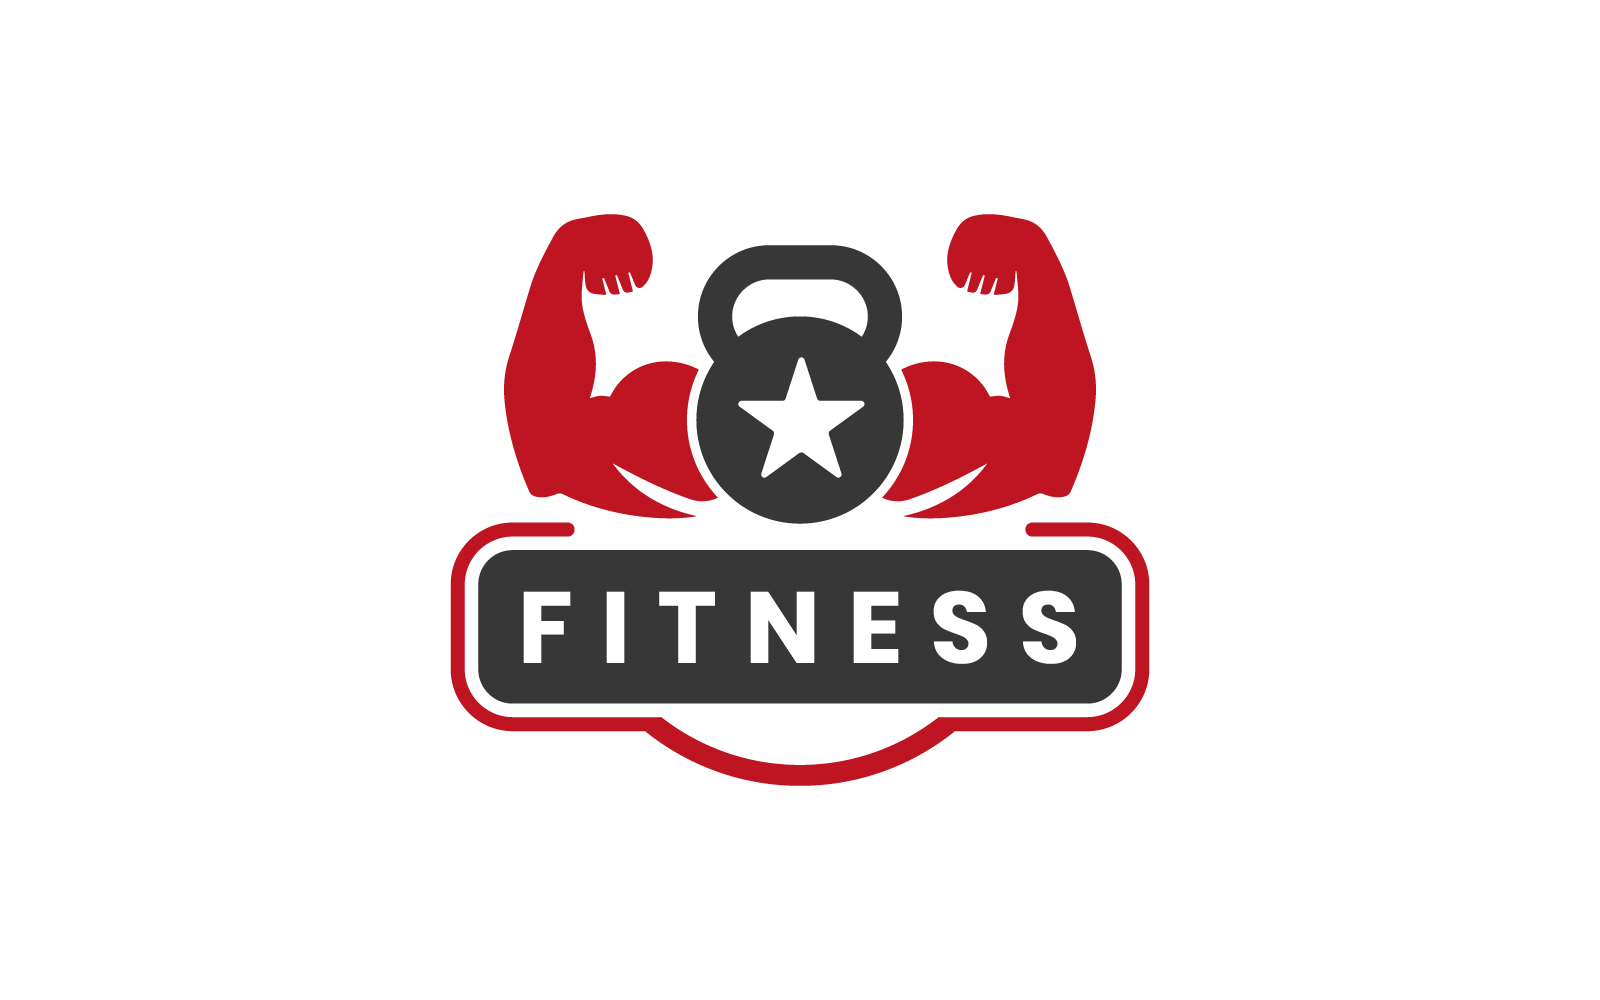 fitness physical logo design template